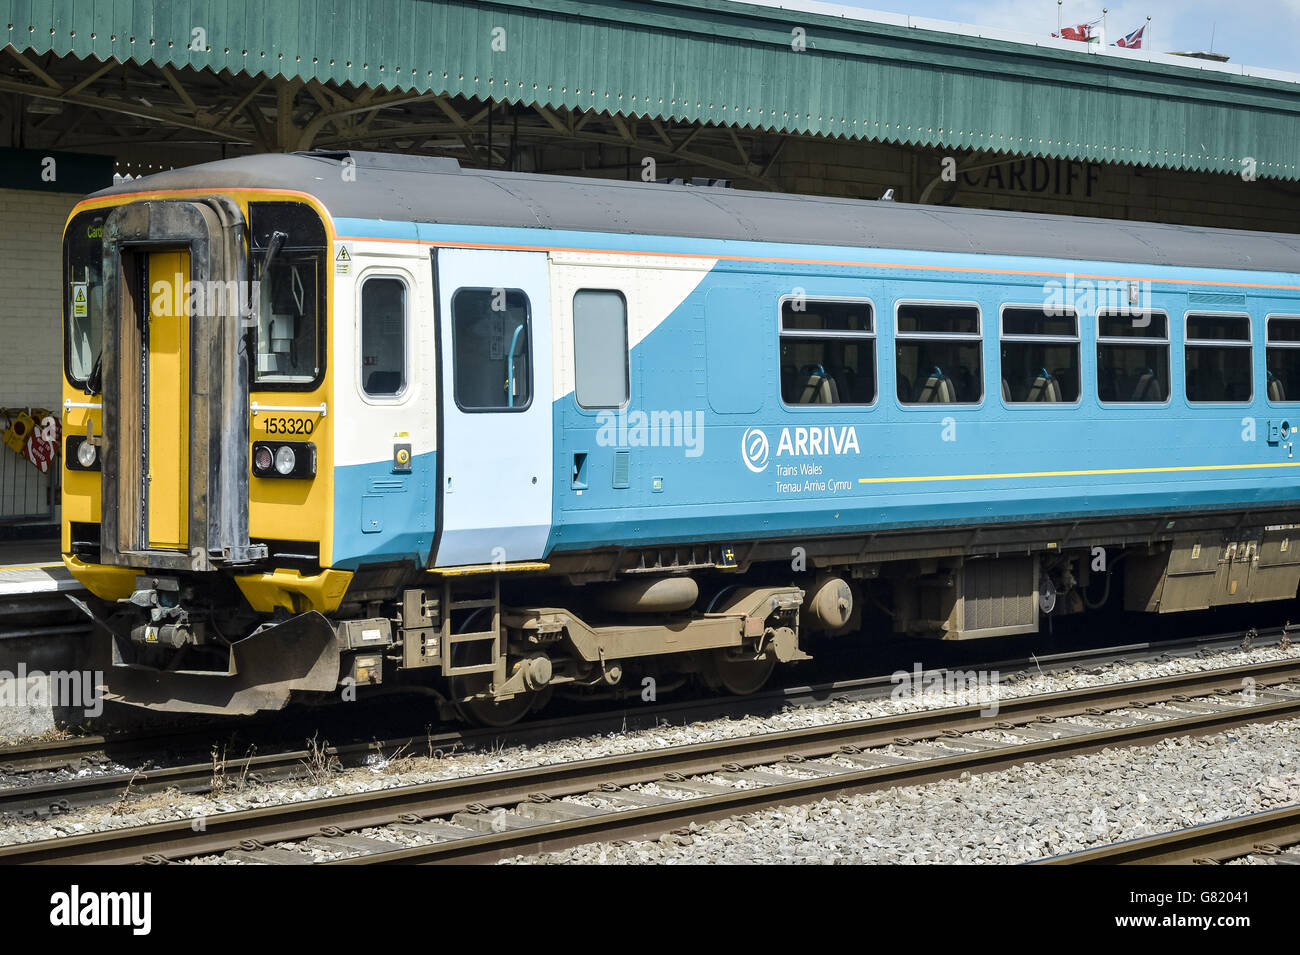 ARRIVA train in Cardiff Central station. Stock Photo